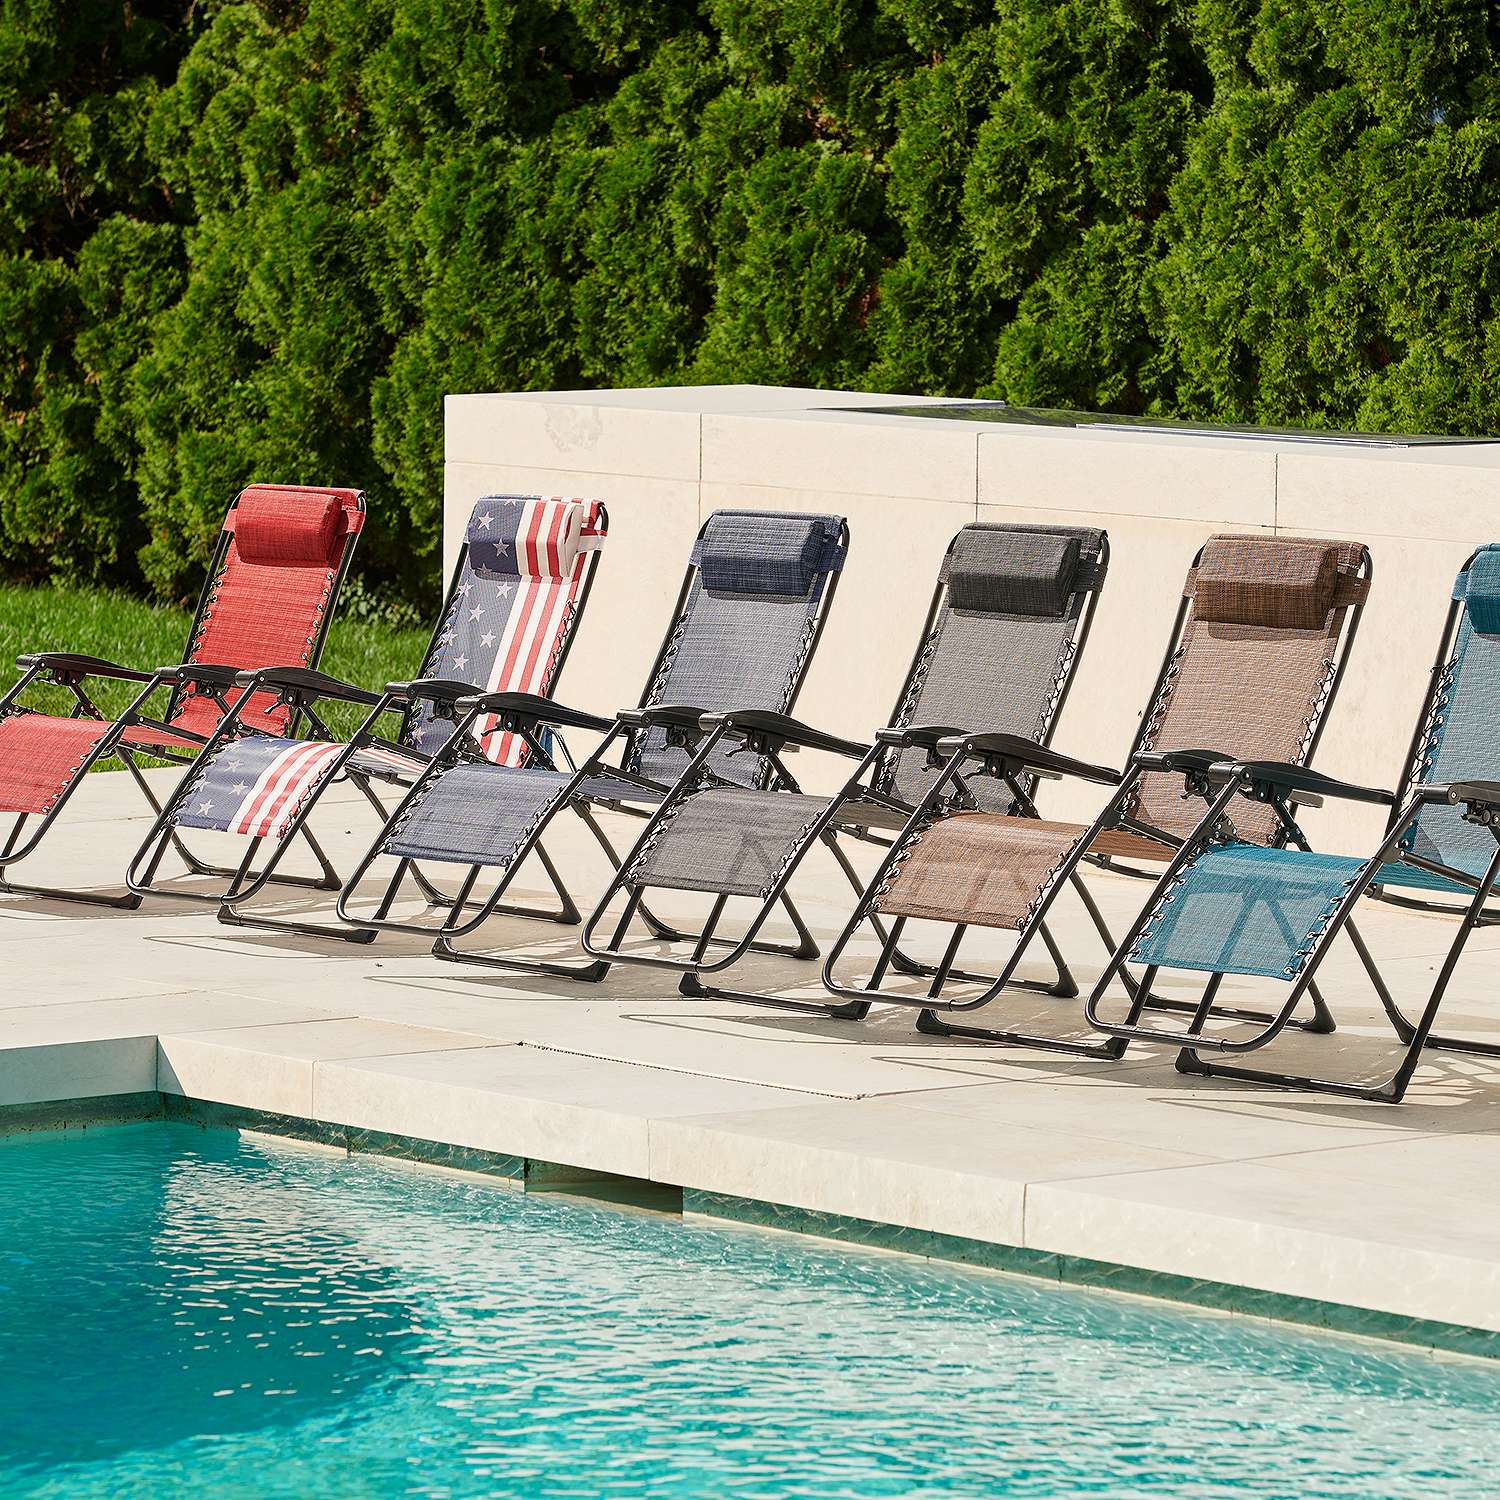 Sonoma Goods For Life Zero Anti-Gravity Patio Lounge Chair (Various Colors) $45 + Free Store Pickup at Kohl's or F/S on Orders $49+